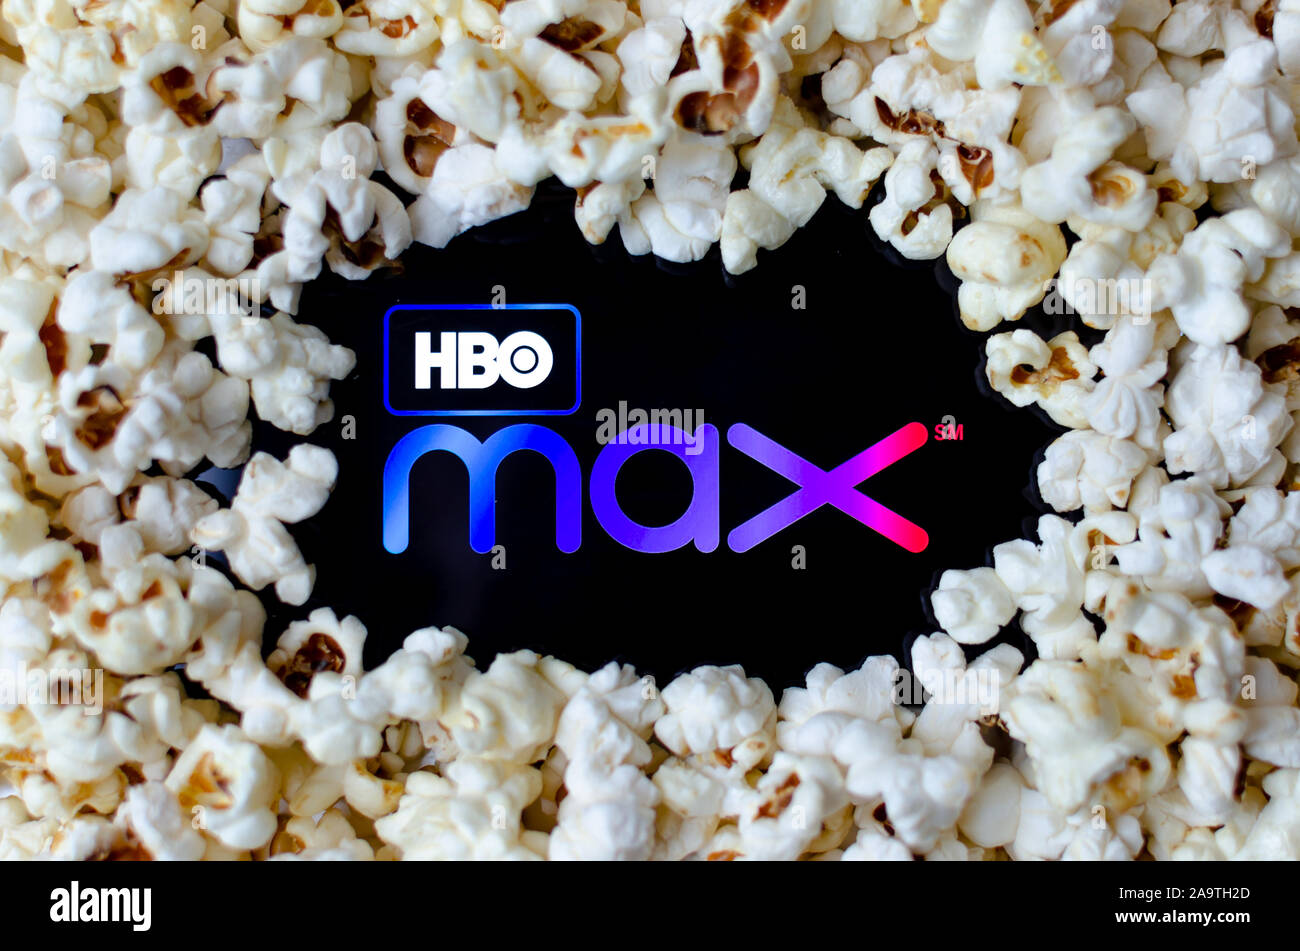 HBO max logo on a smartphone covered with popcorn. Concept photo for a new video streaming service. Stock Photo